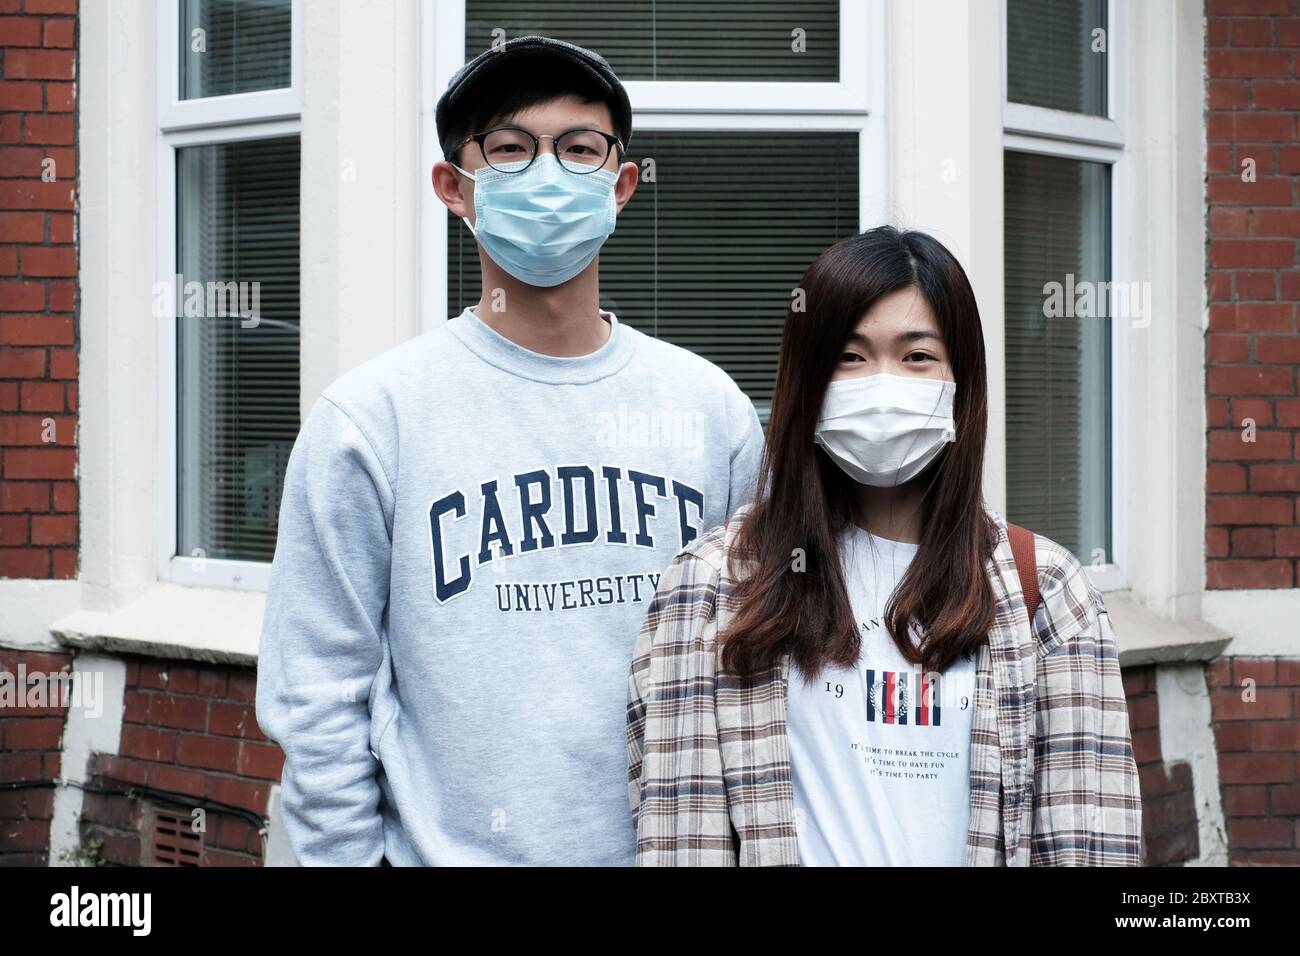 Public wearing a mask in Cardiff during the coronavirus pandemic 2020 Stock Photo